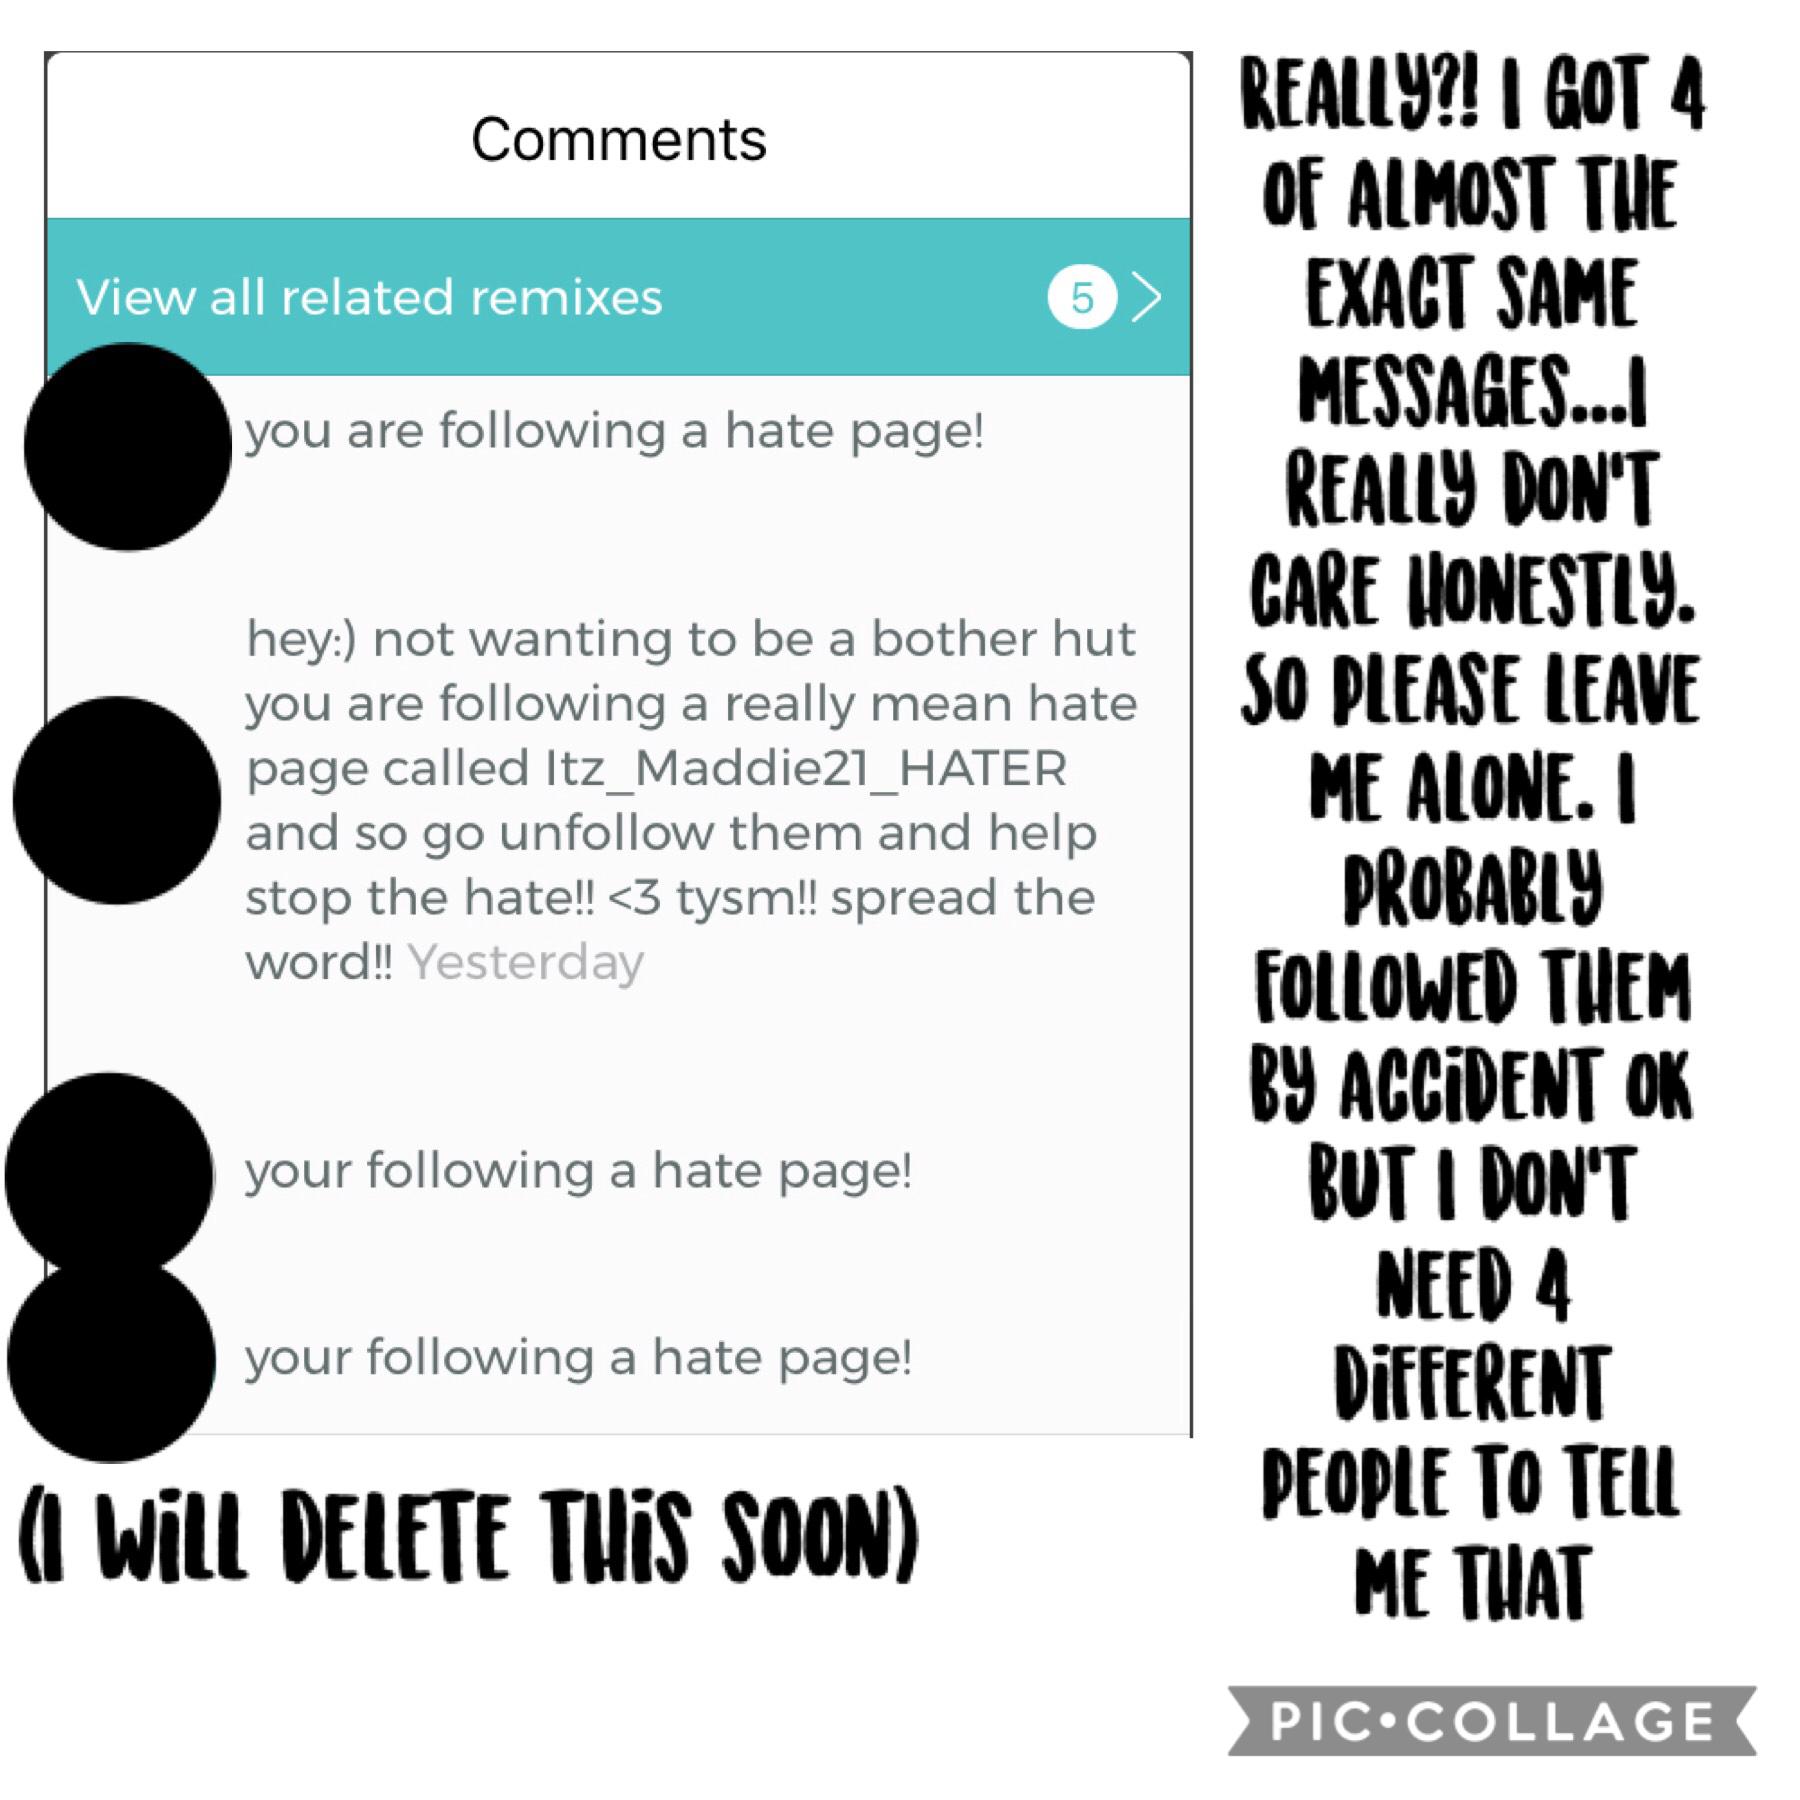 I covered up their icons for privacy but if you wanna see who they where you can check the comments on the post to the right 